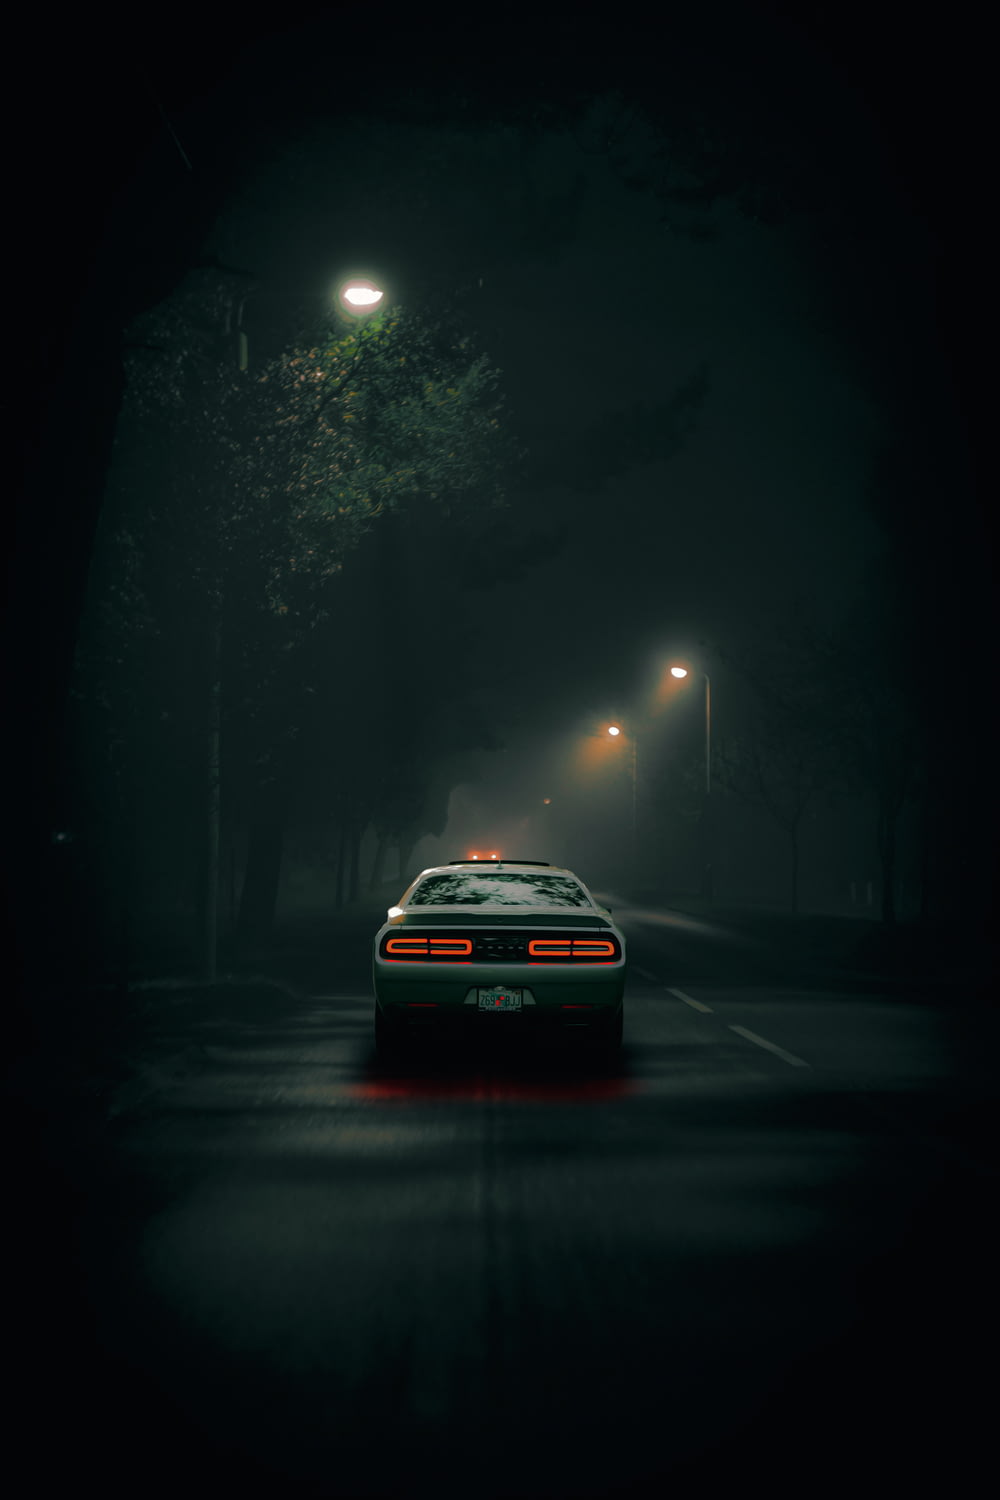 a car on a road at night